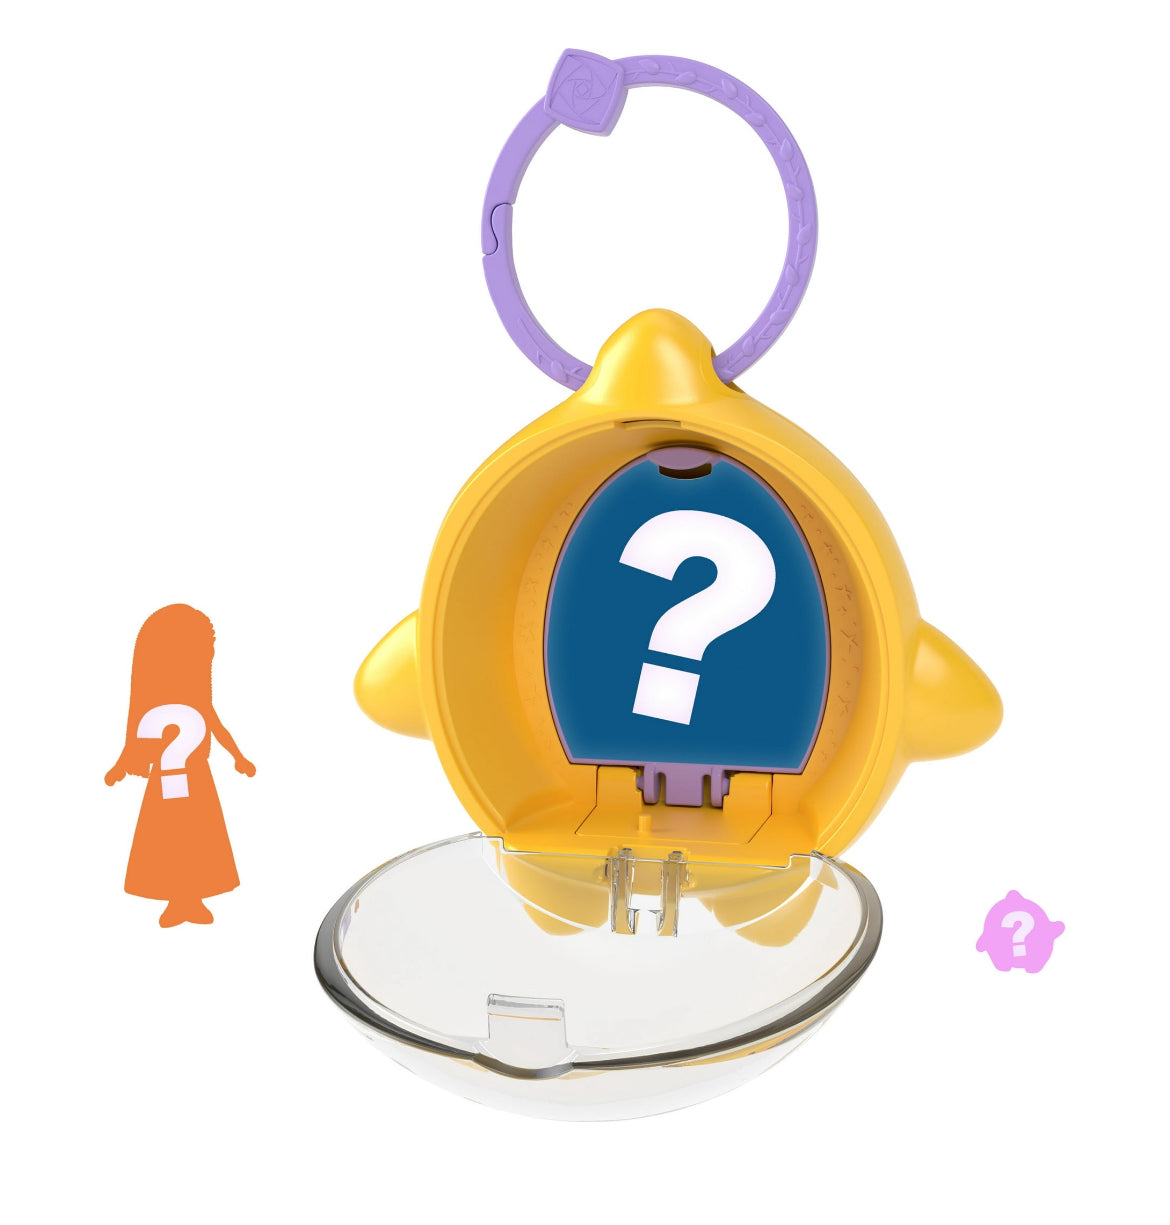 Disney’s Wish Star Reveals Mini Doll Surprise, Keychain Compact with Character Doll & Accessory (Styles May Vary)